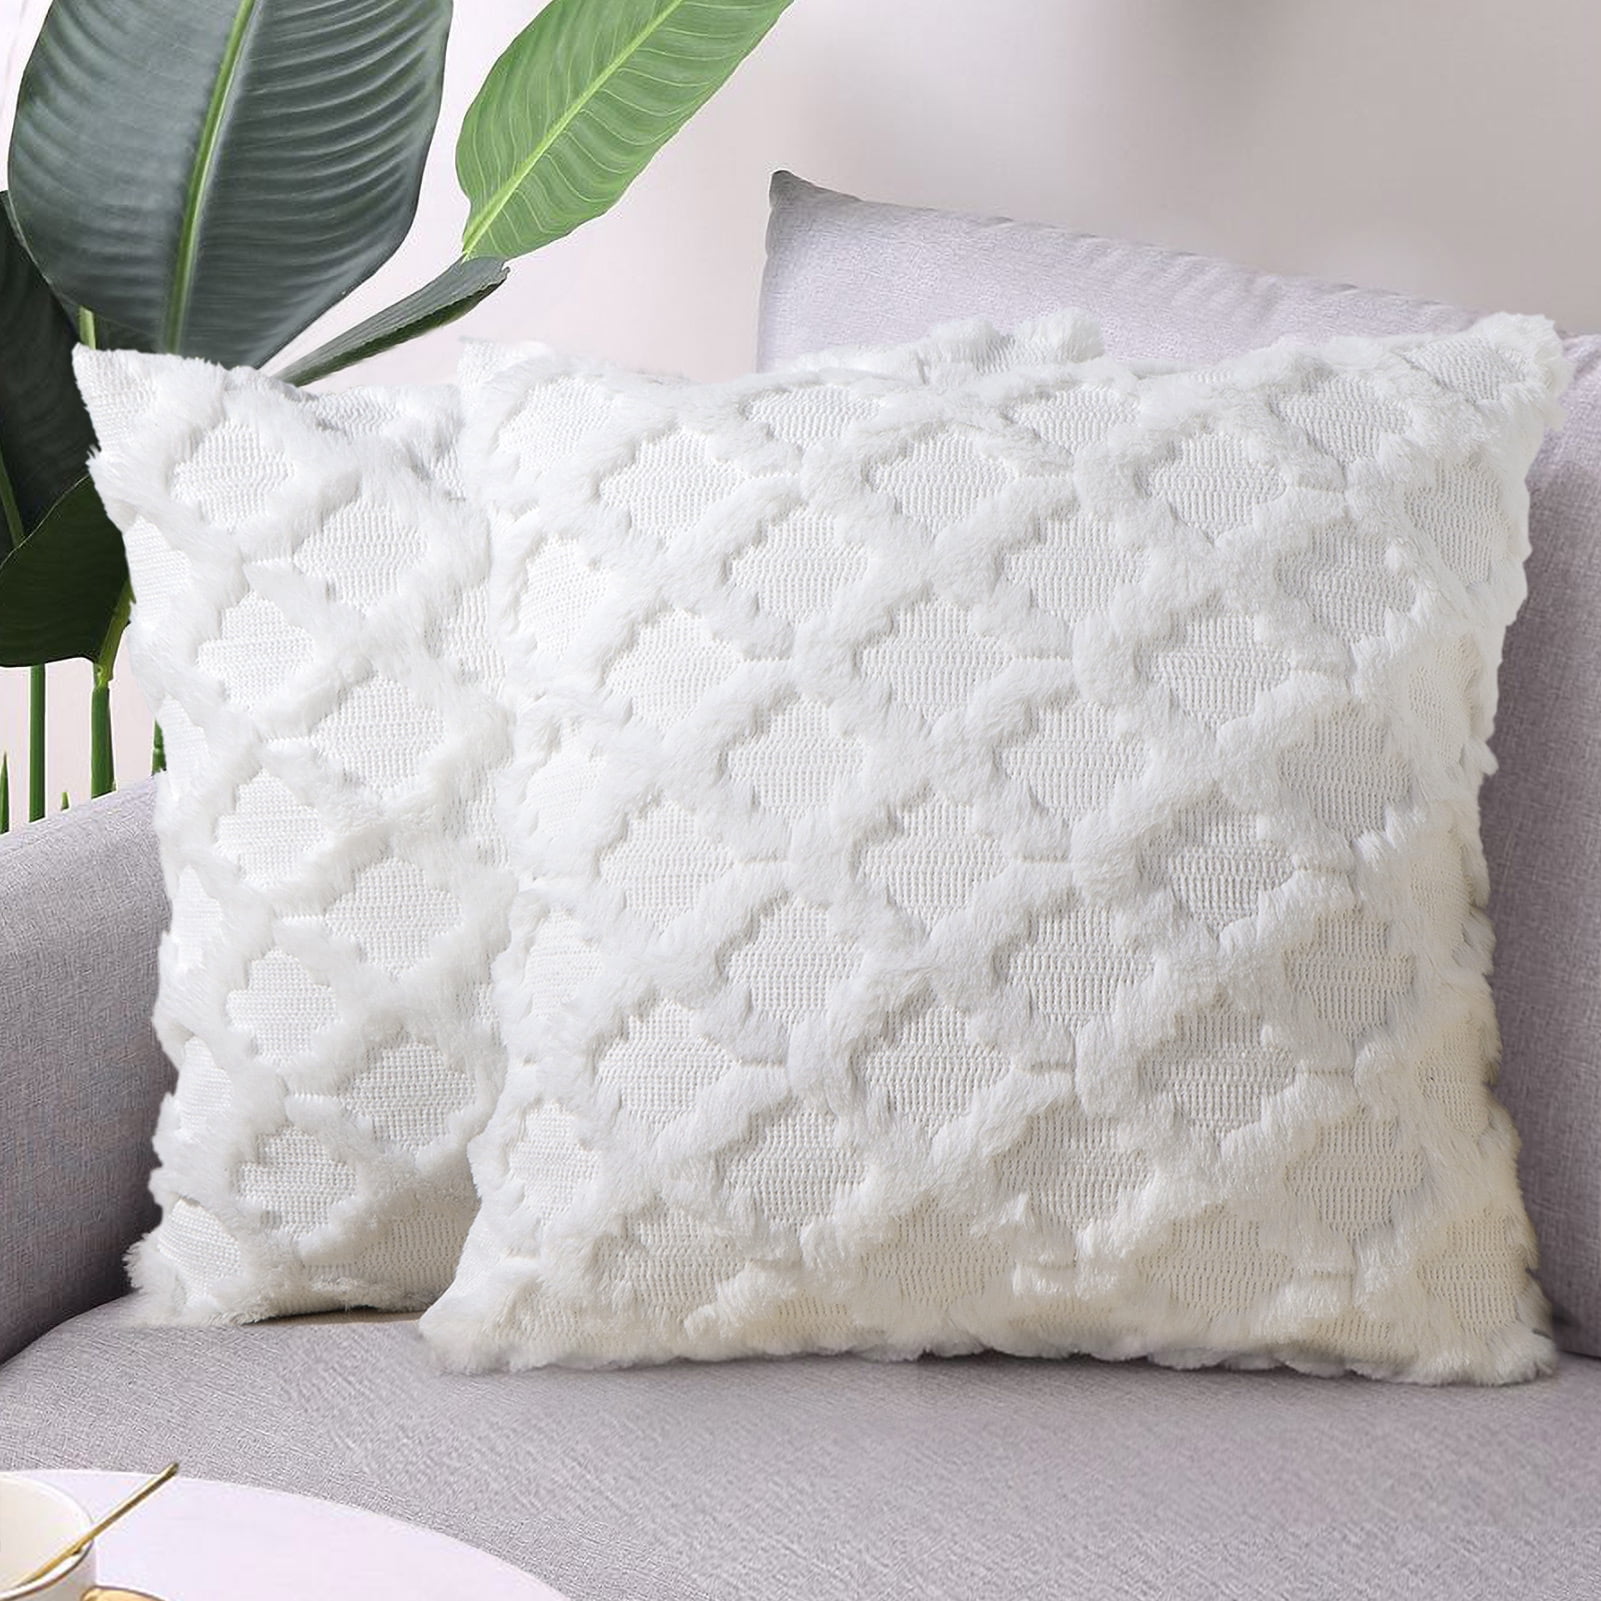 Home Brilliant 18x18 Pillow Cover White Decorative Throw Pillows Set of 2  Soild Couch Pillow Cases for Sofa Bedroom Car 18 x 18 Inch 45cm, Pearl Ivory